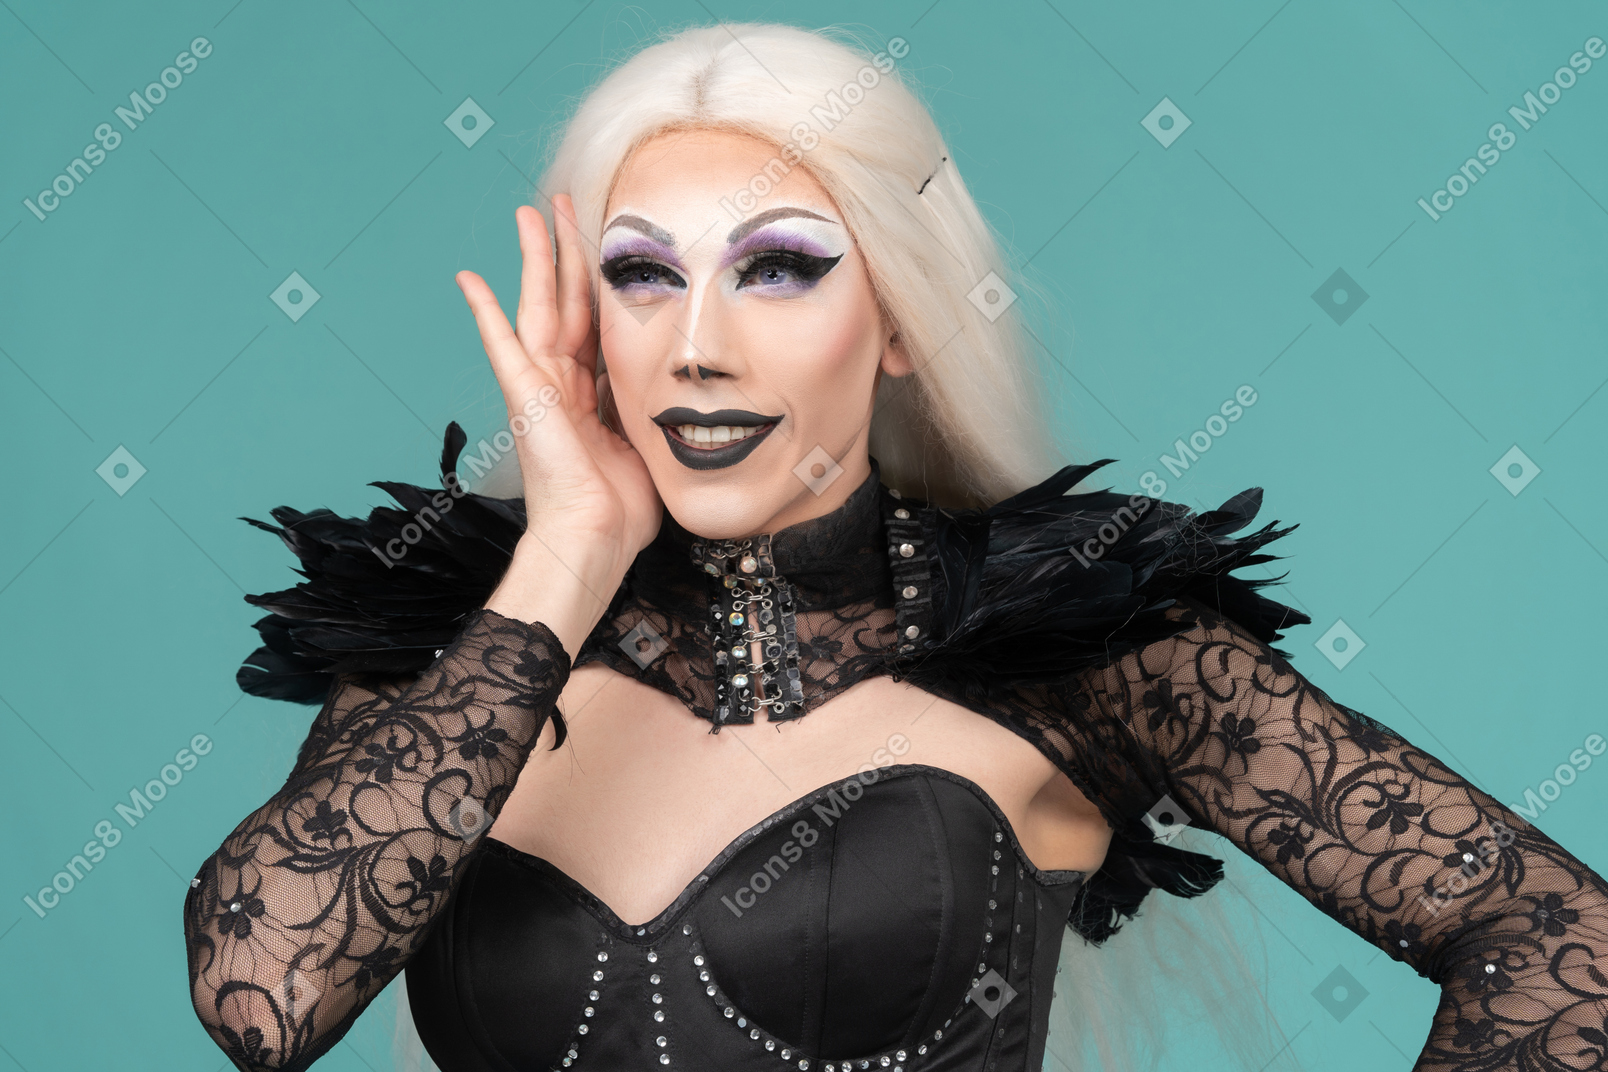 Dragqueen flirty looking and touching face